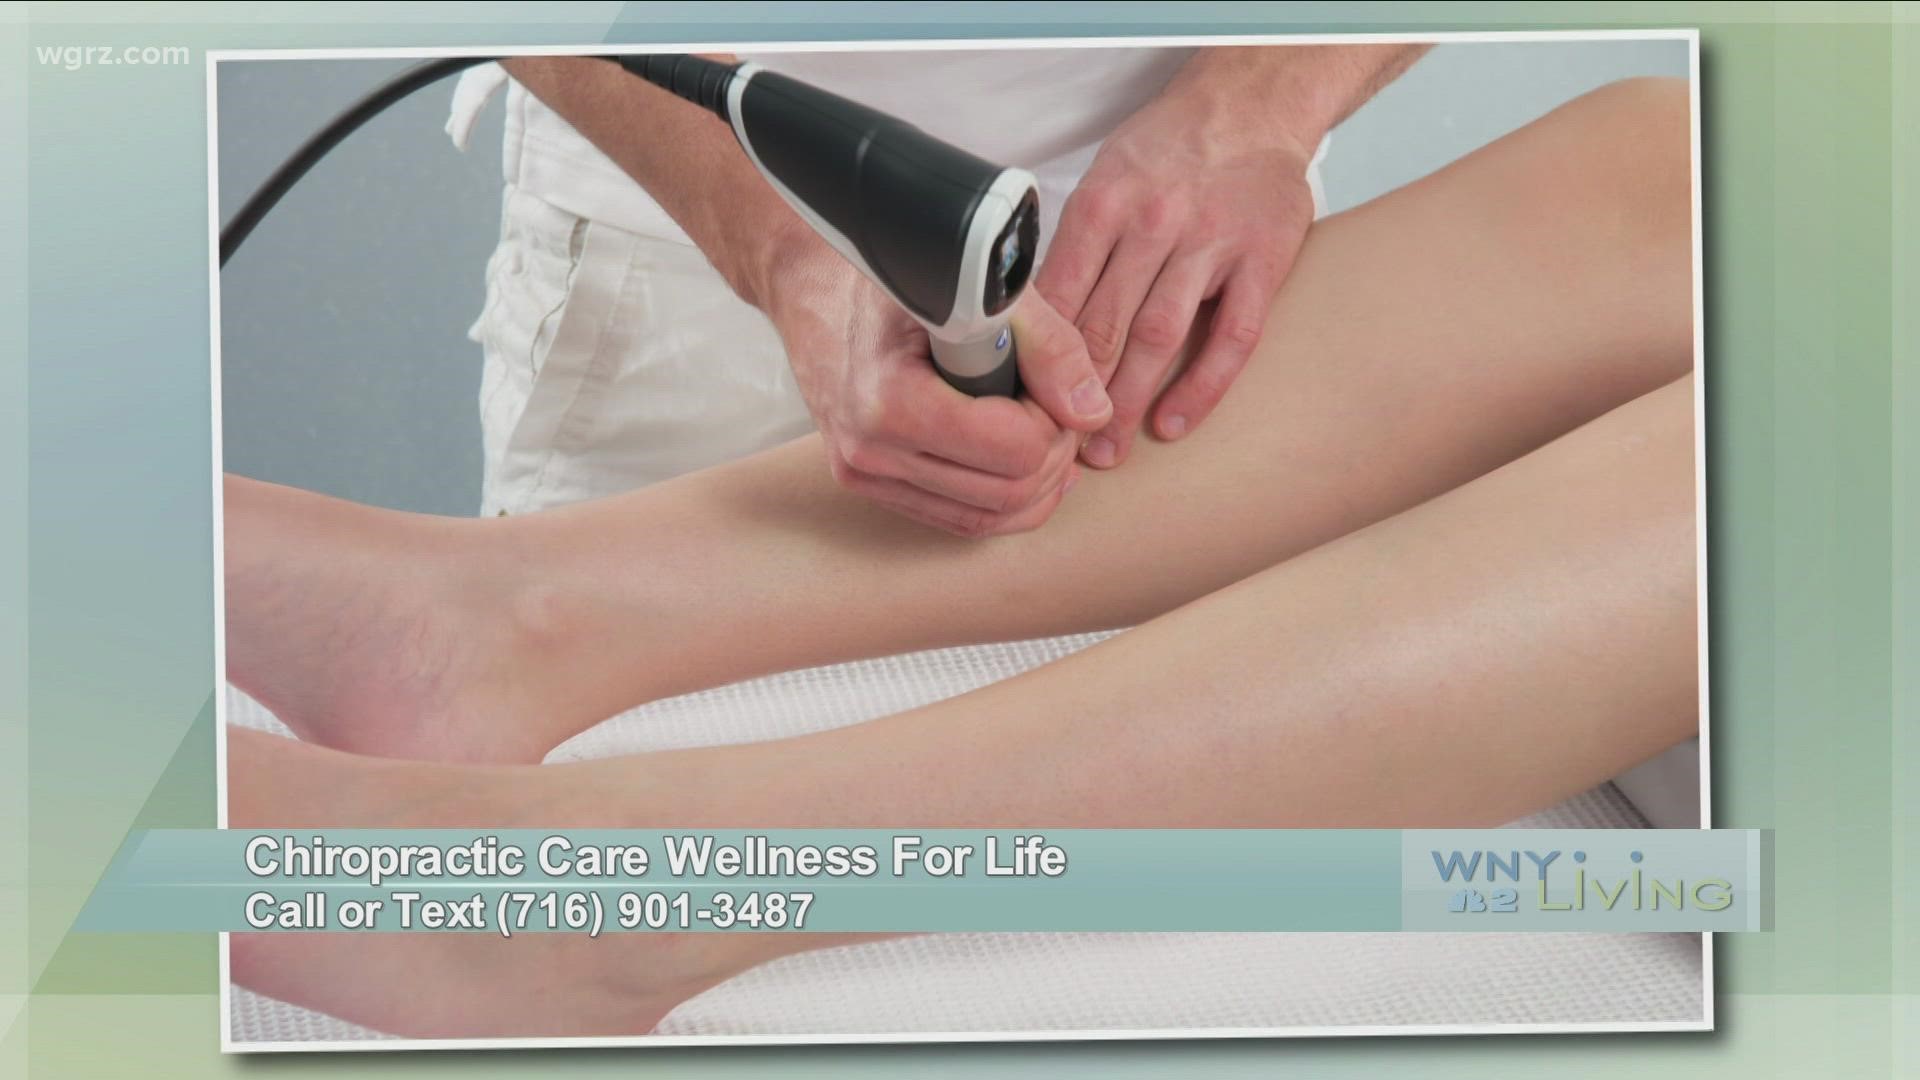 WNY Living - December 18 - Chiropractic Care Wellness For Life (THIS VIDEO IS SPONSORED BY CHIROPRACTIC CARE WELLNESS FOR LIFE)